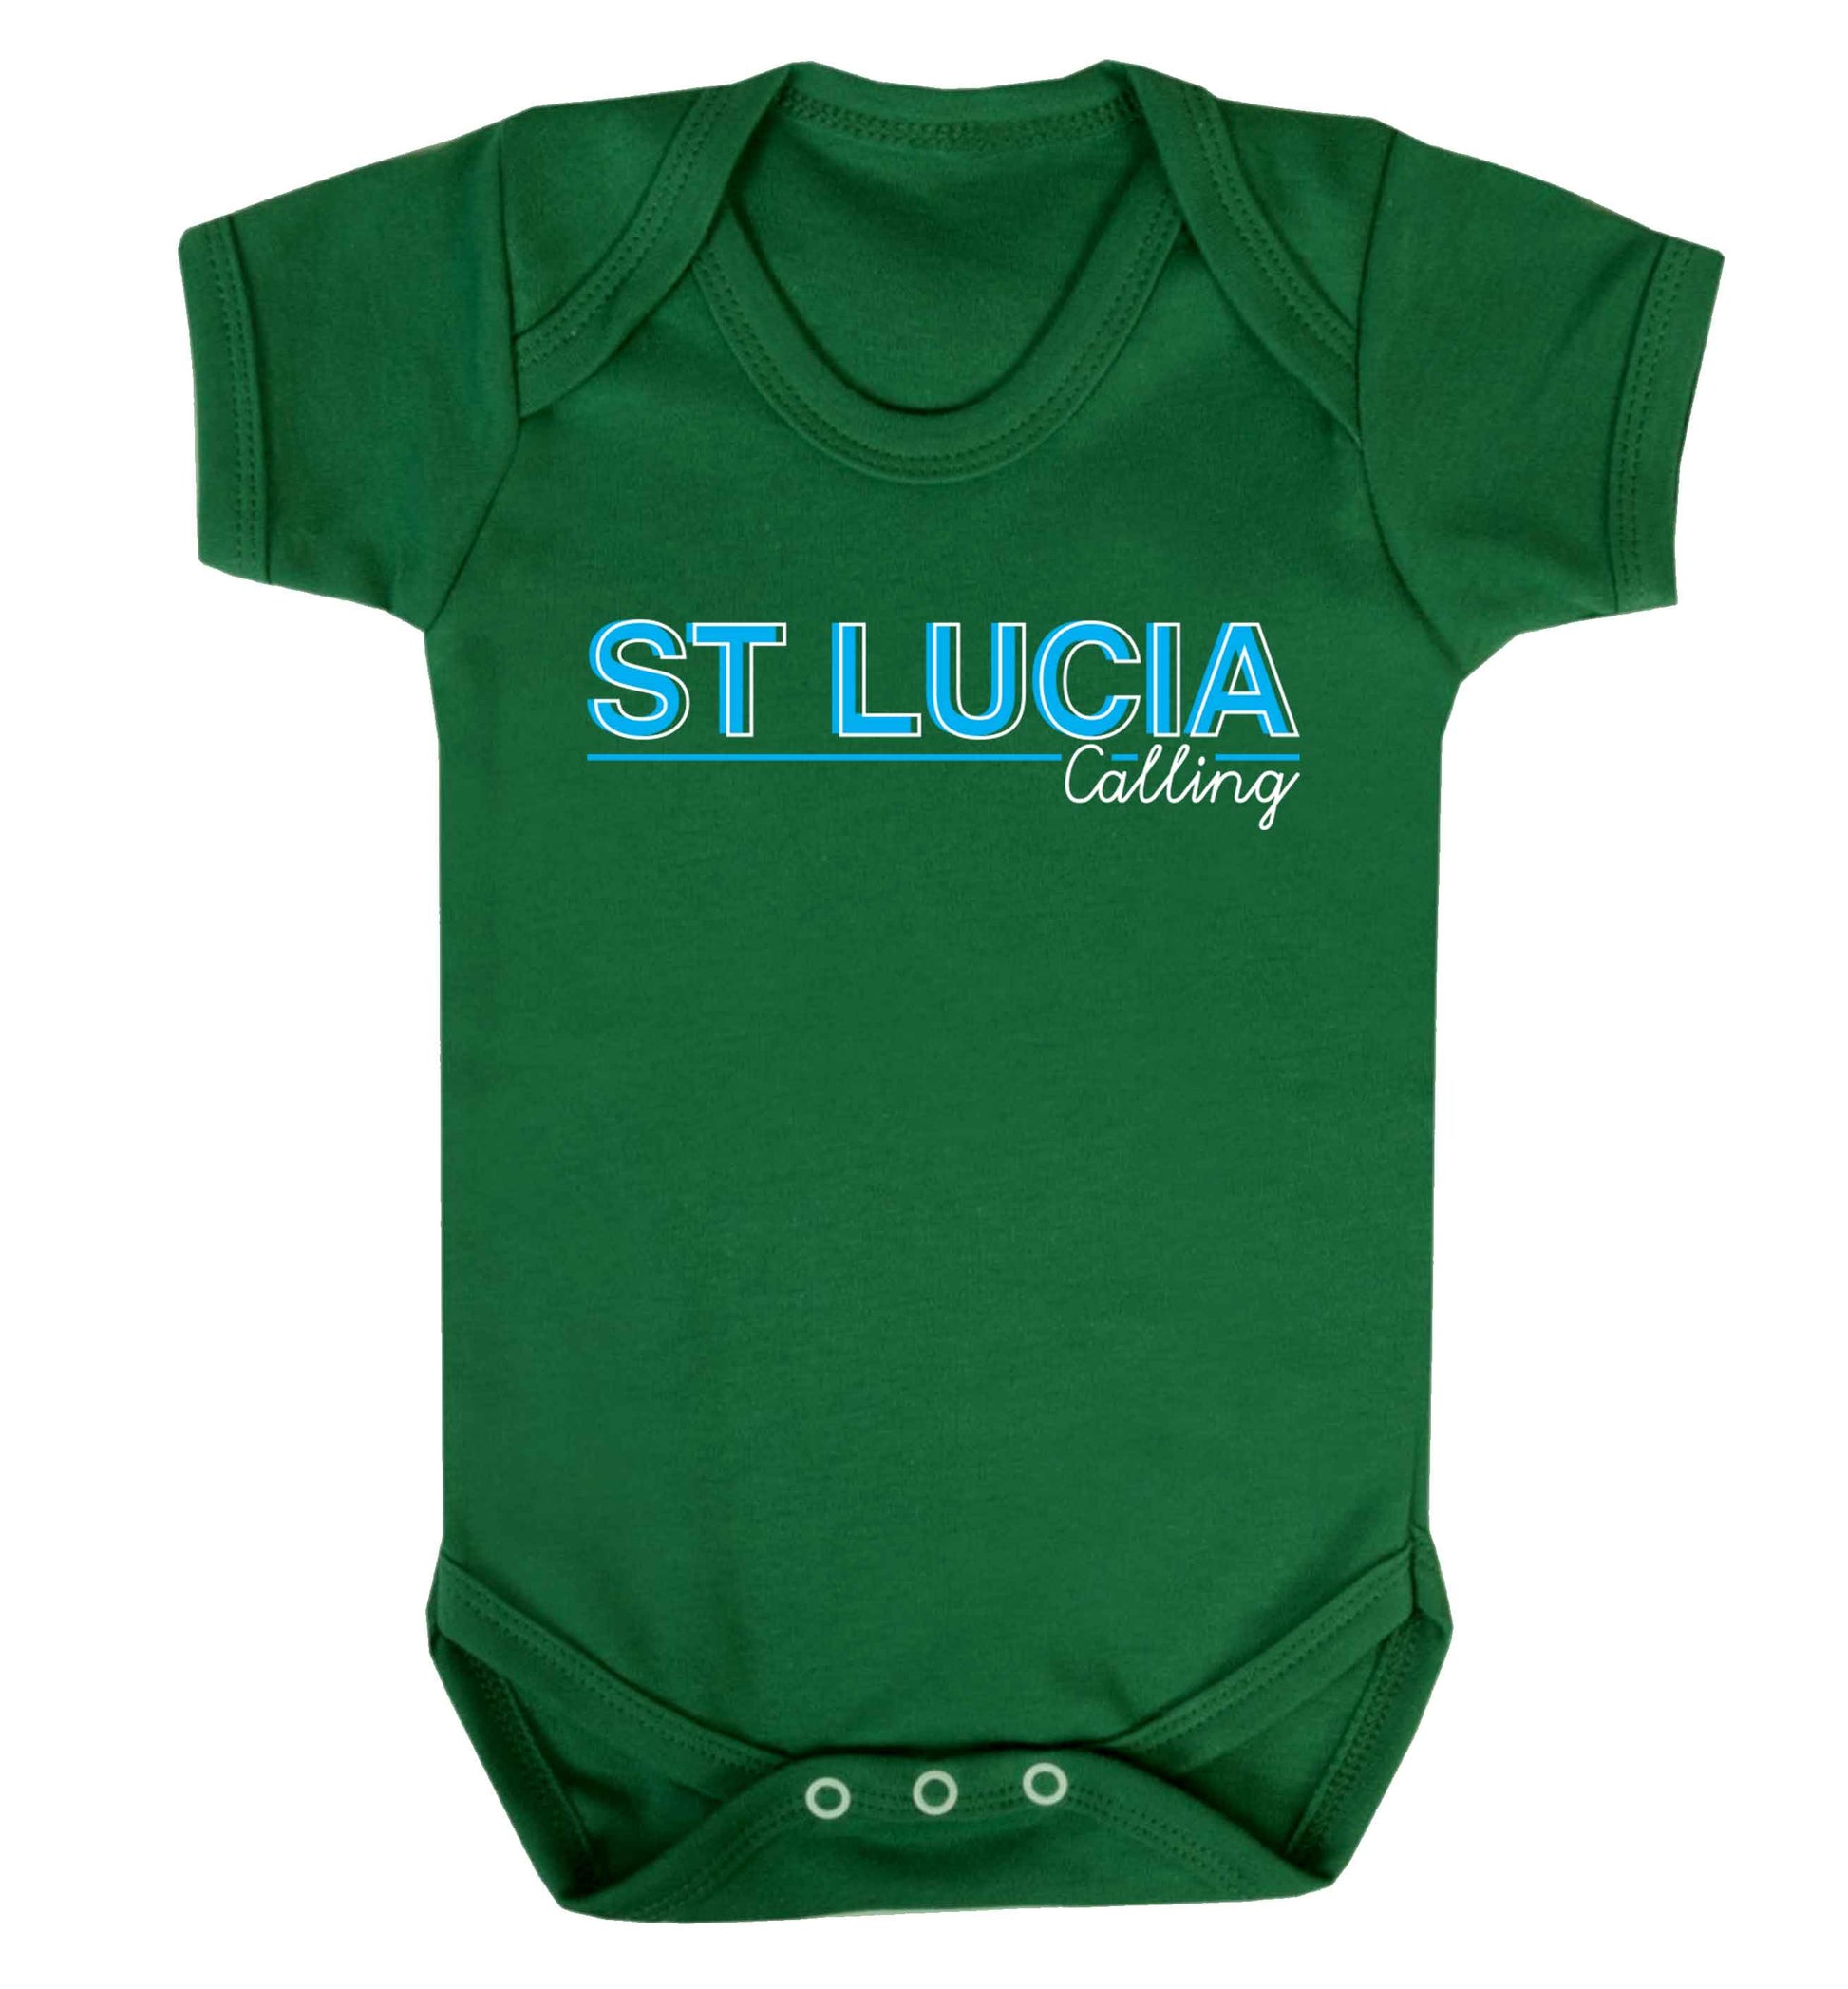 St Lucia calling Baby Vest green 18-24 months